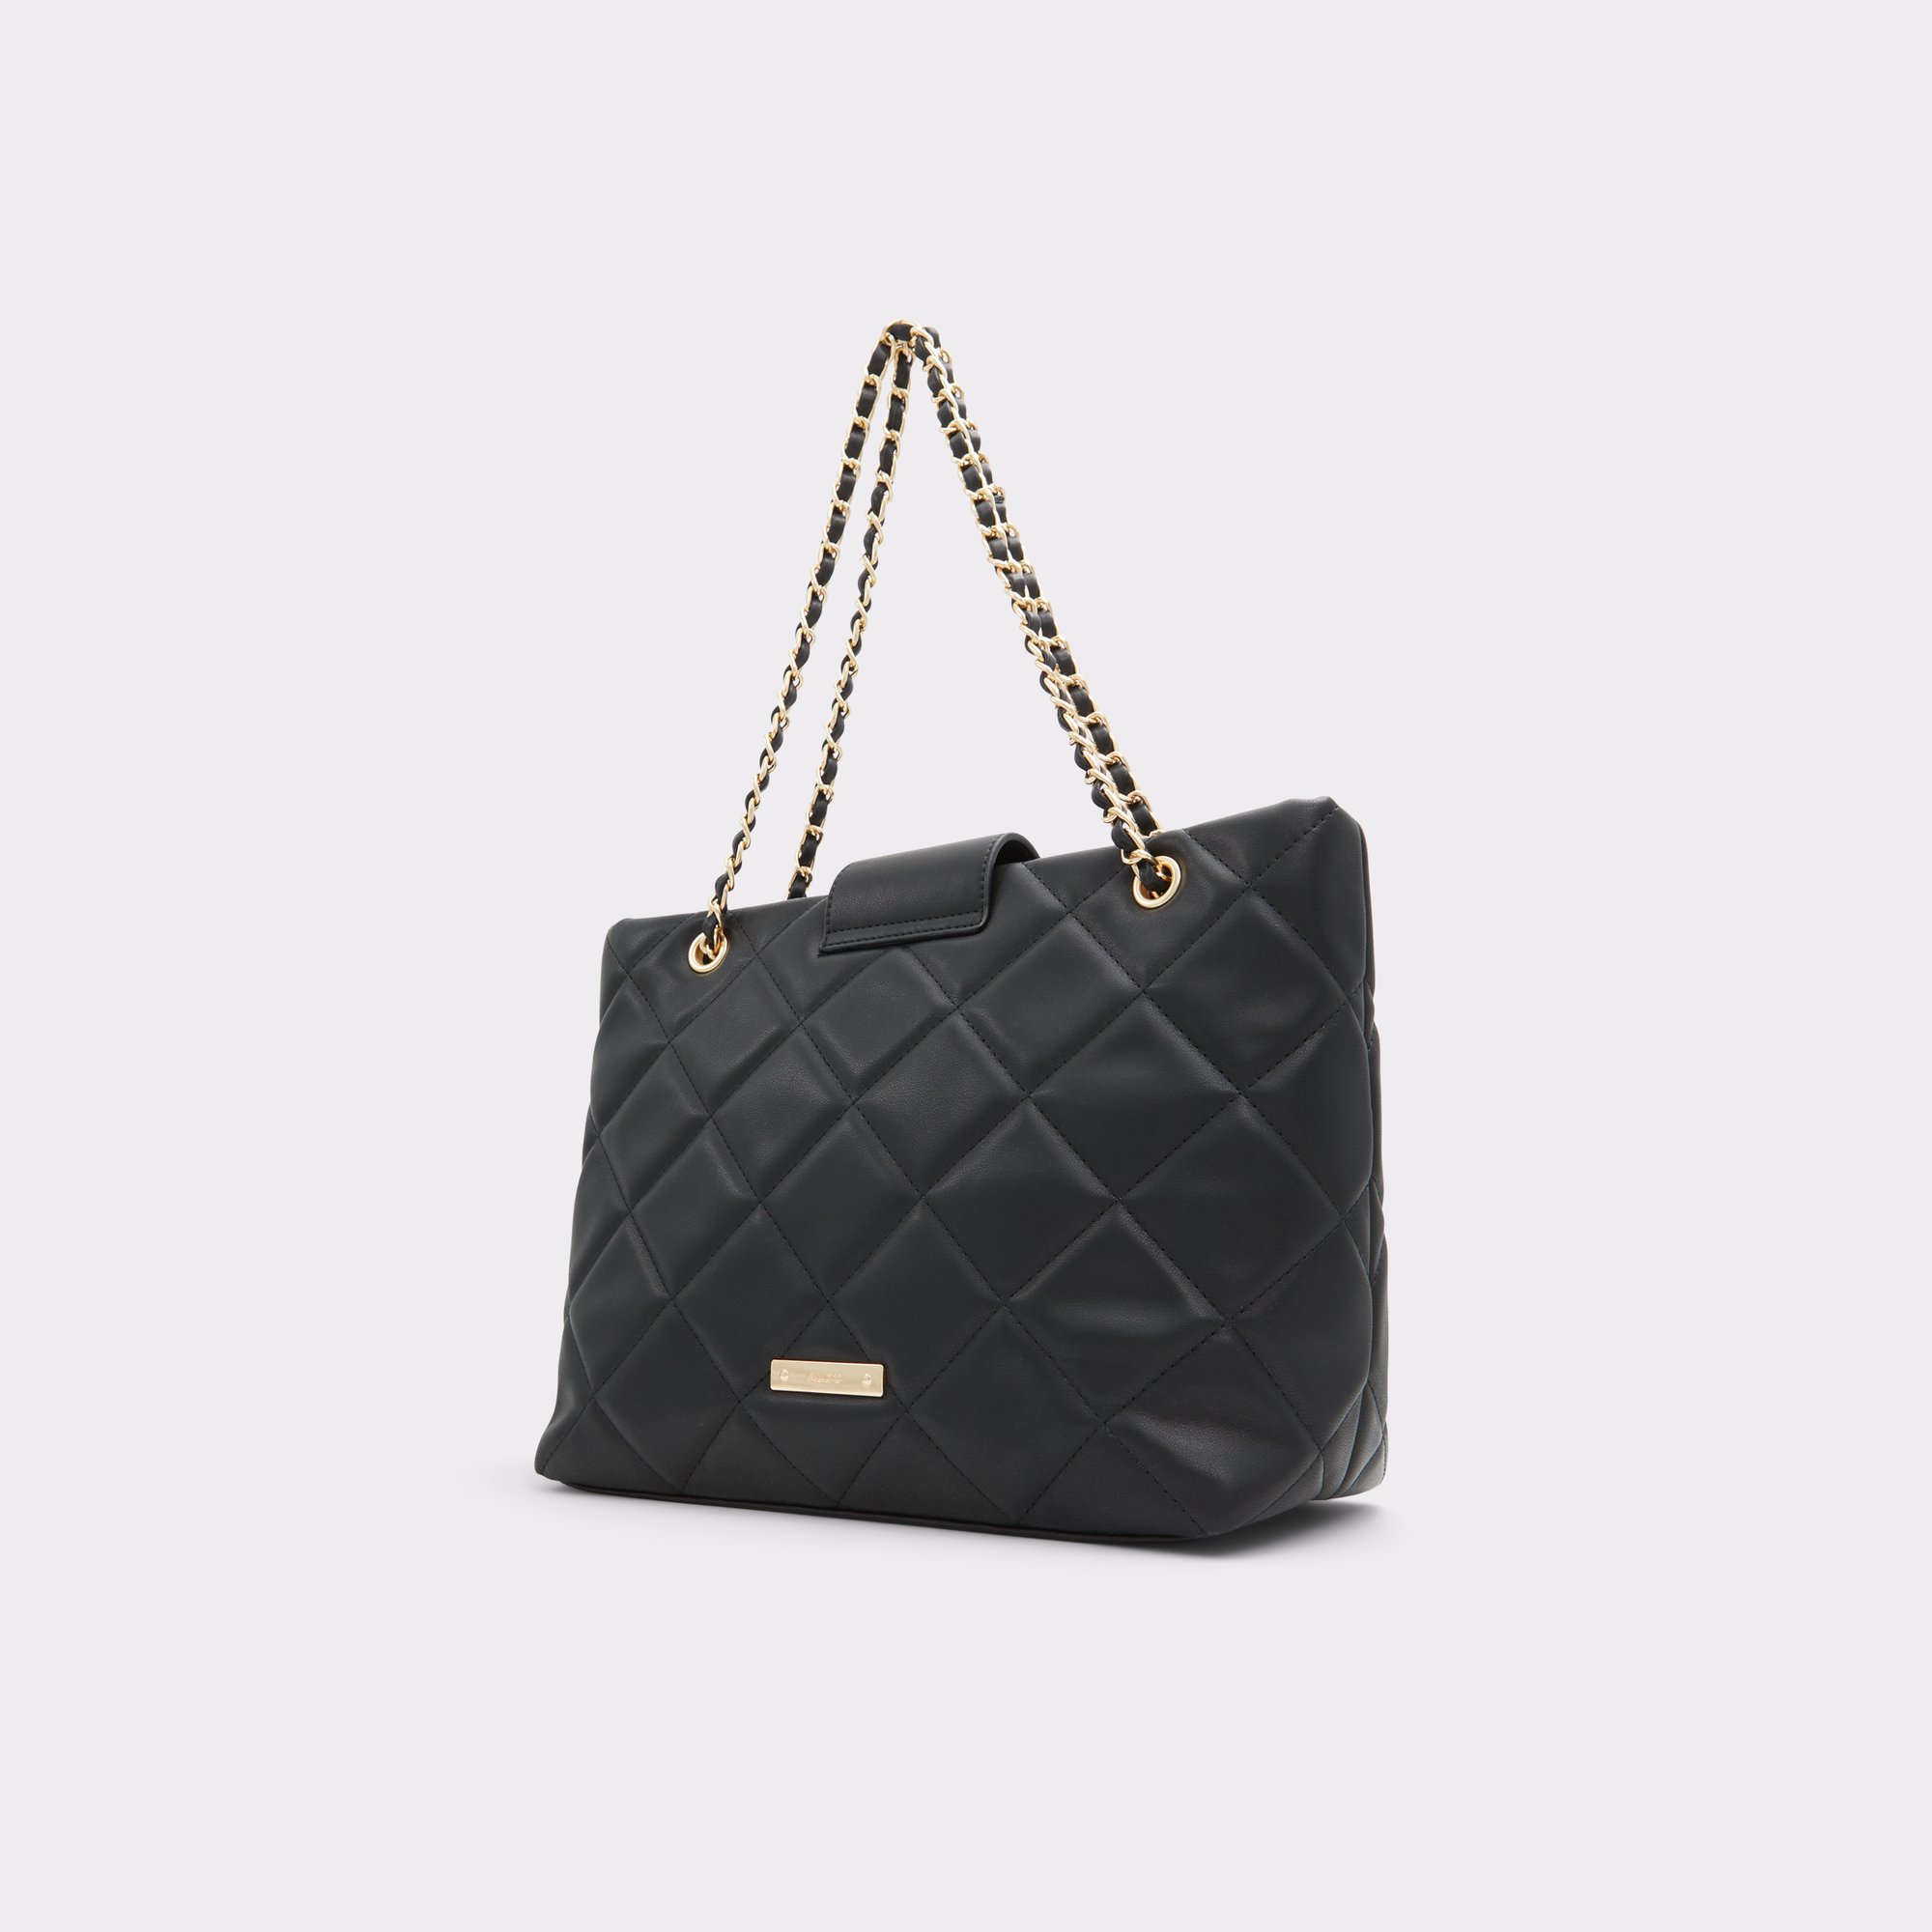 CHANEL Bags & Handbags for Women for sale, Shop with Afterpay